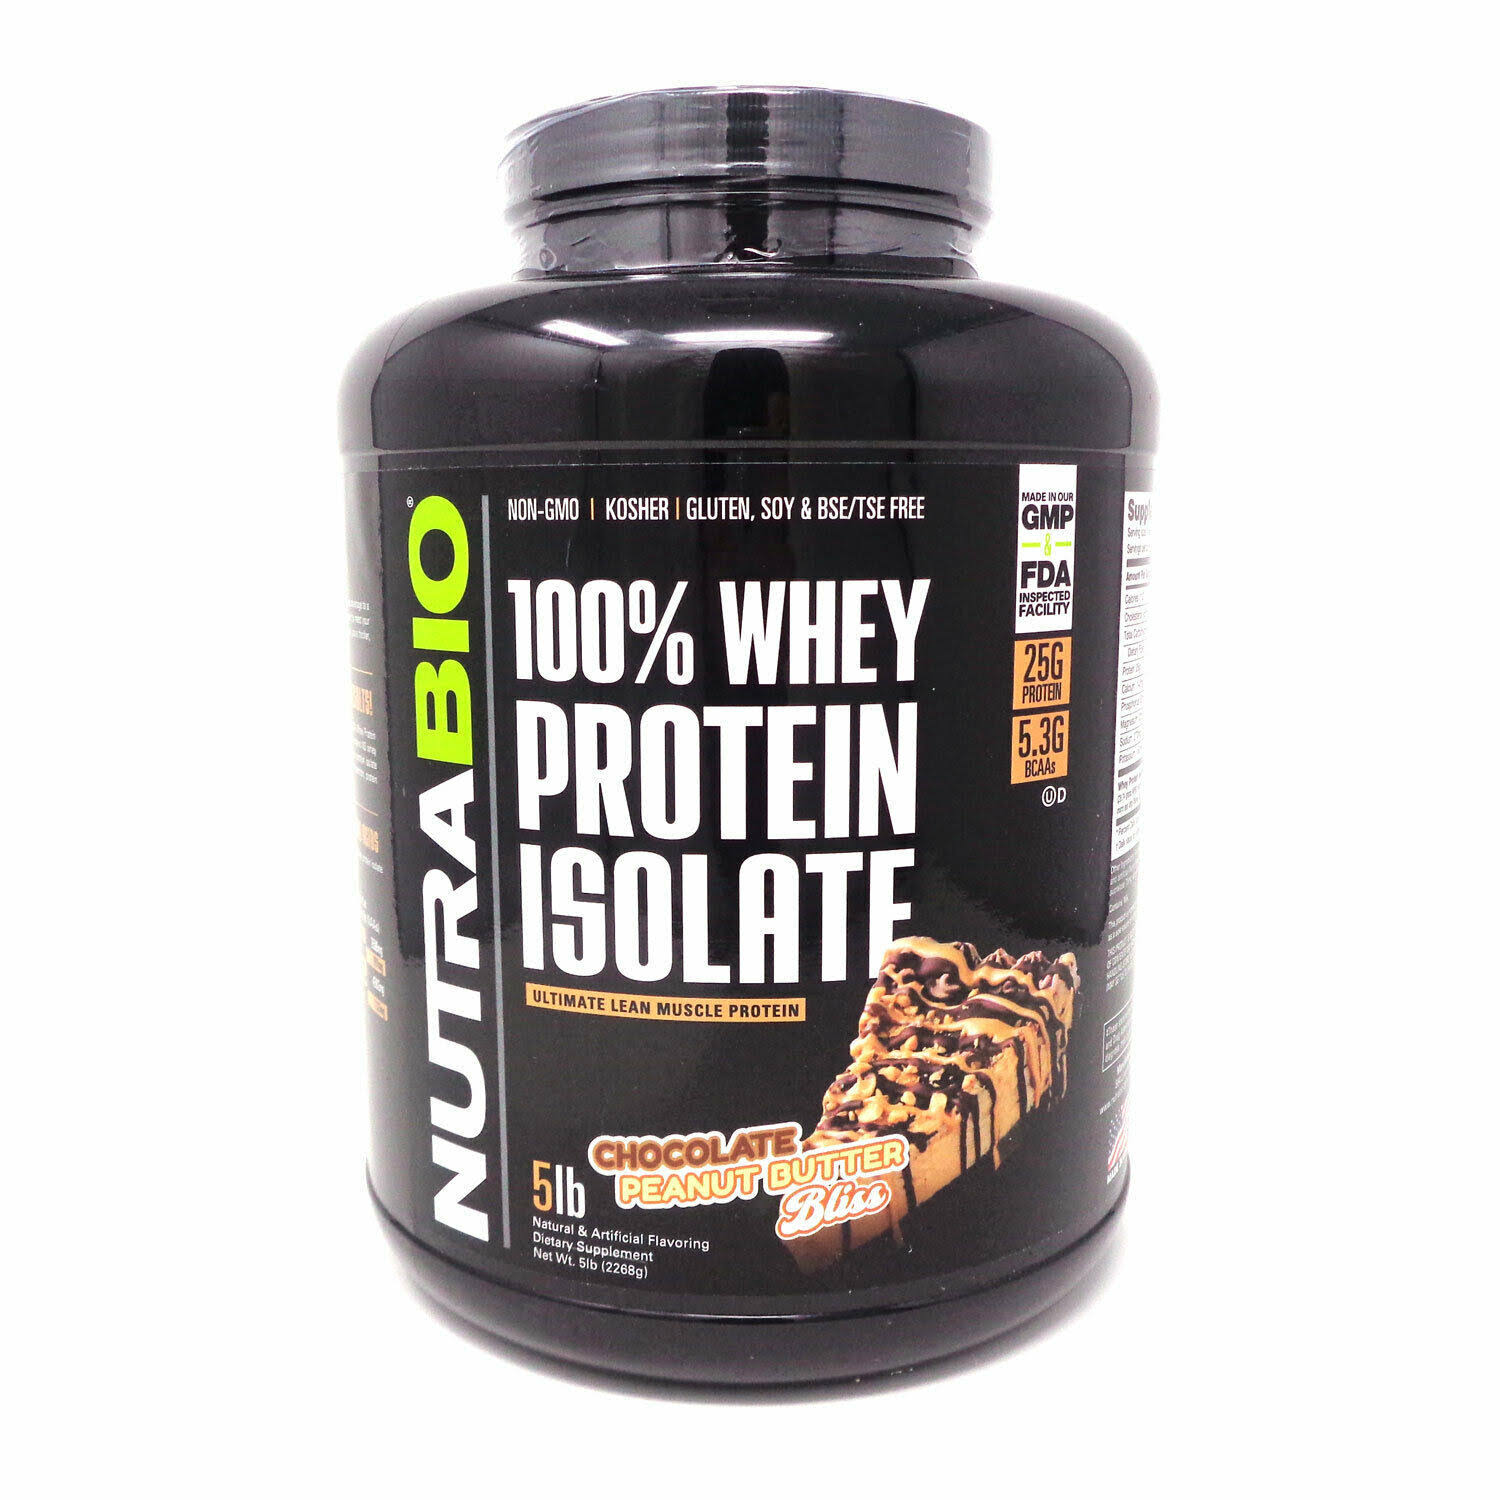 NutraBio - 100% Whey Protein Isolate, 5 lbs / Chocolate Peanut Butter Bliss